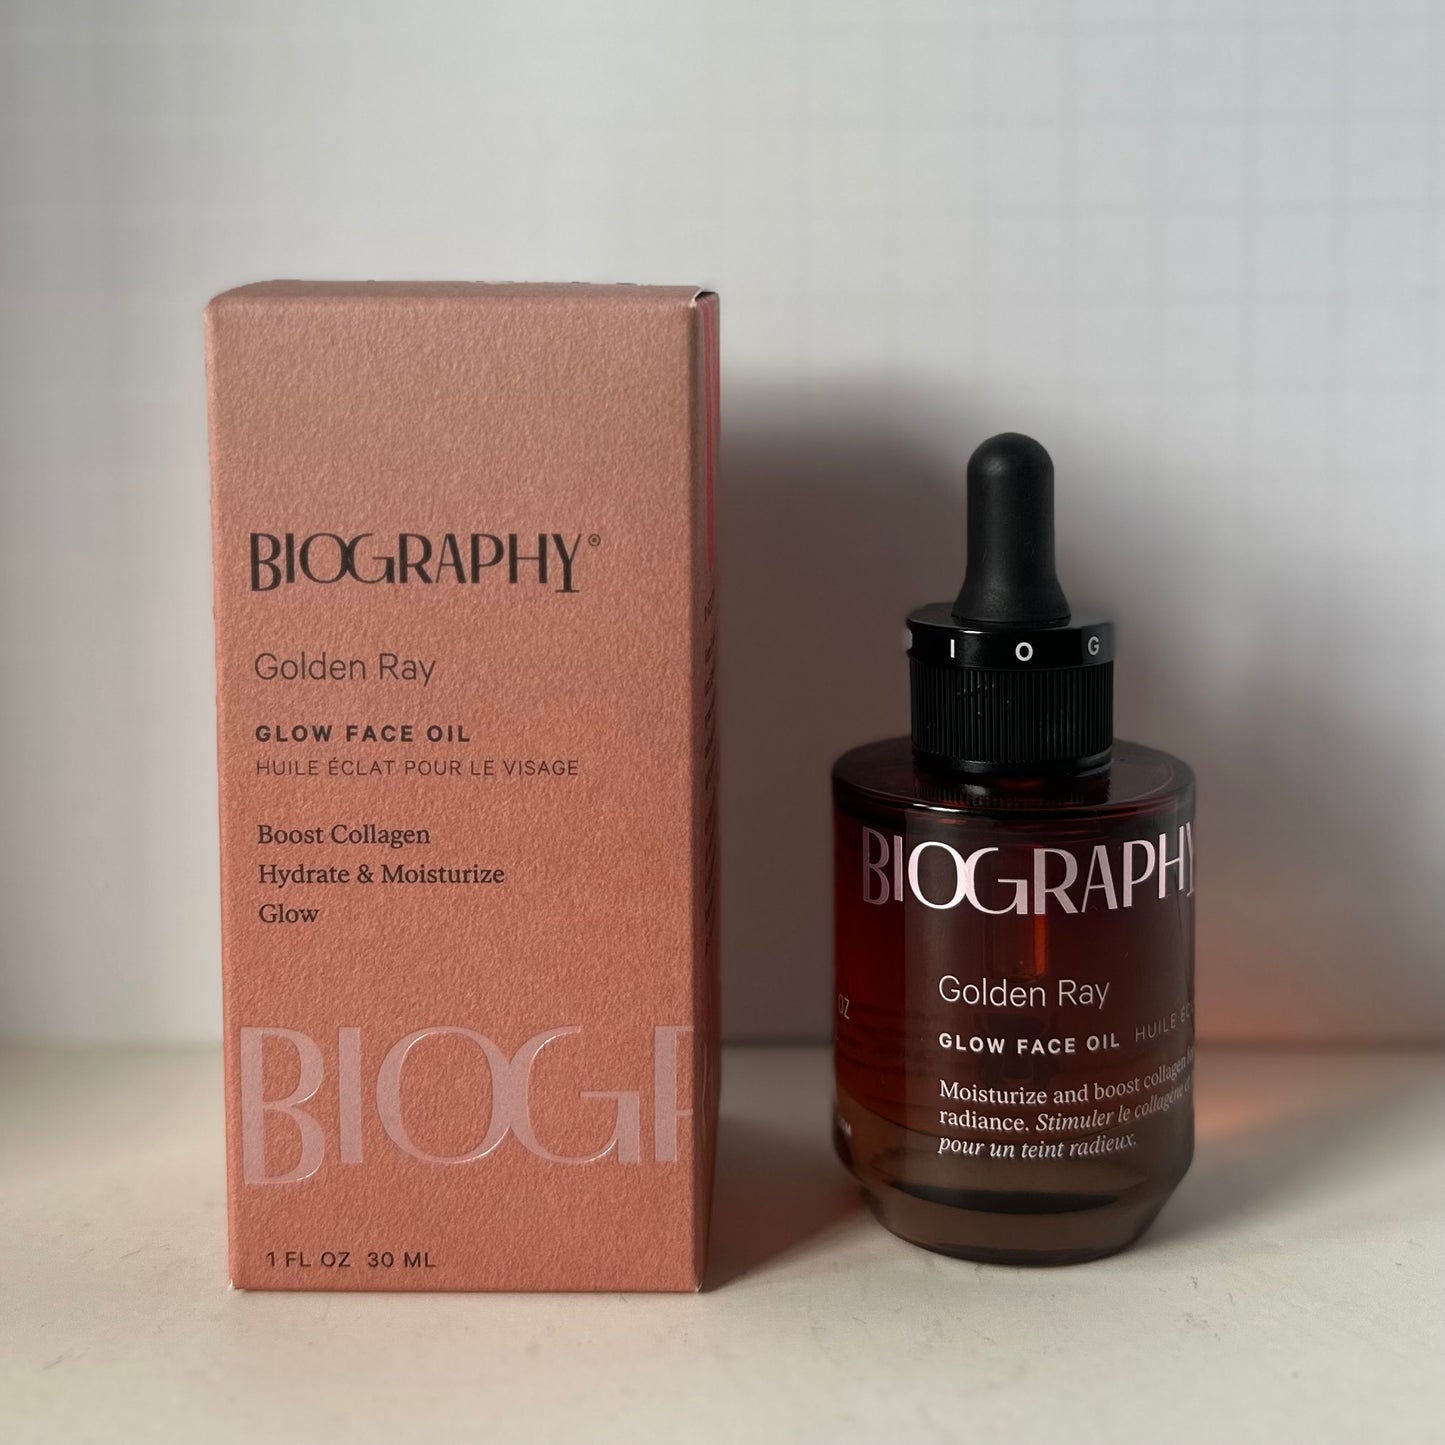 BIOGRAPHY Golden Ray Glow Face Oil